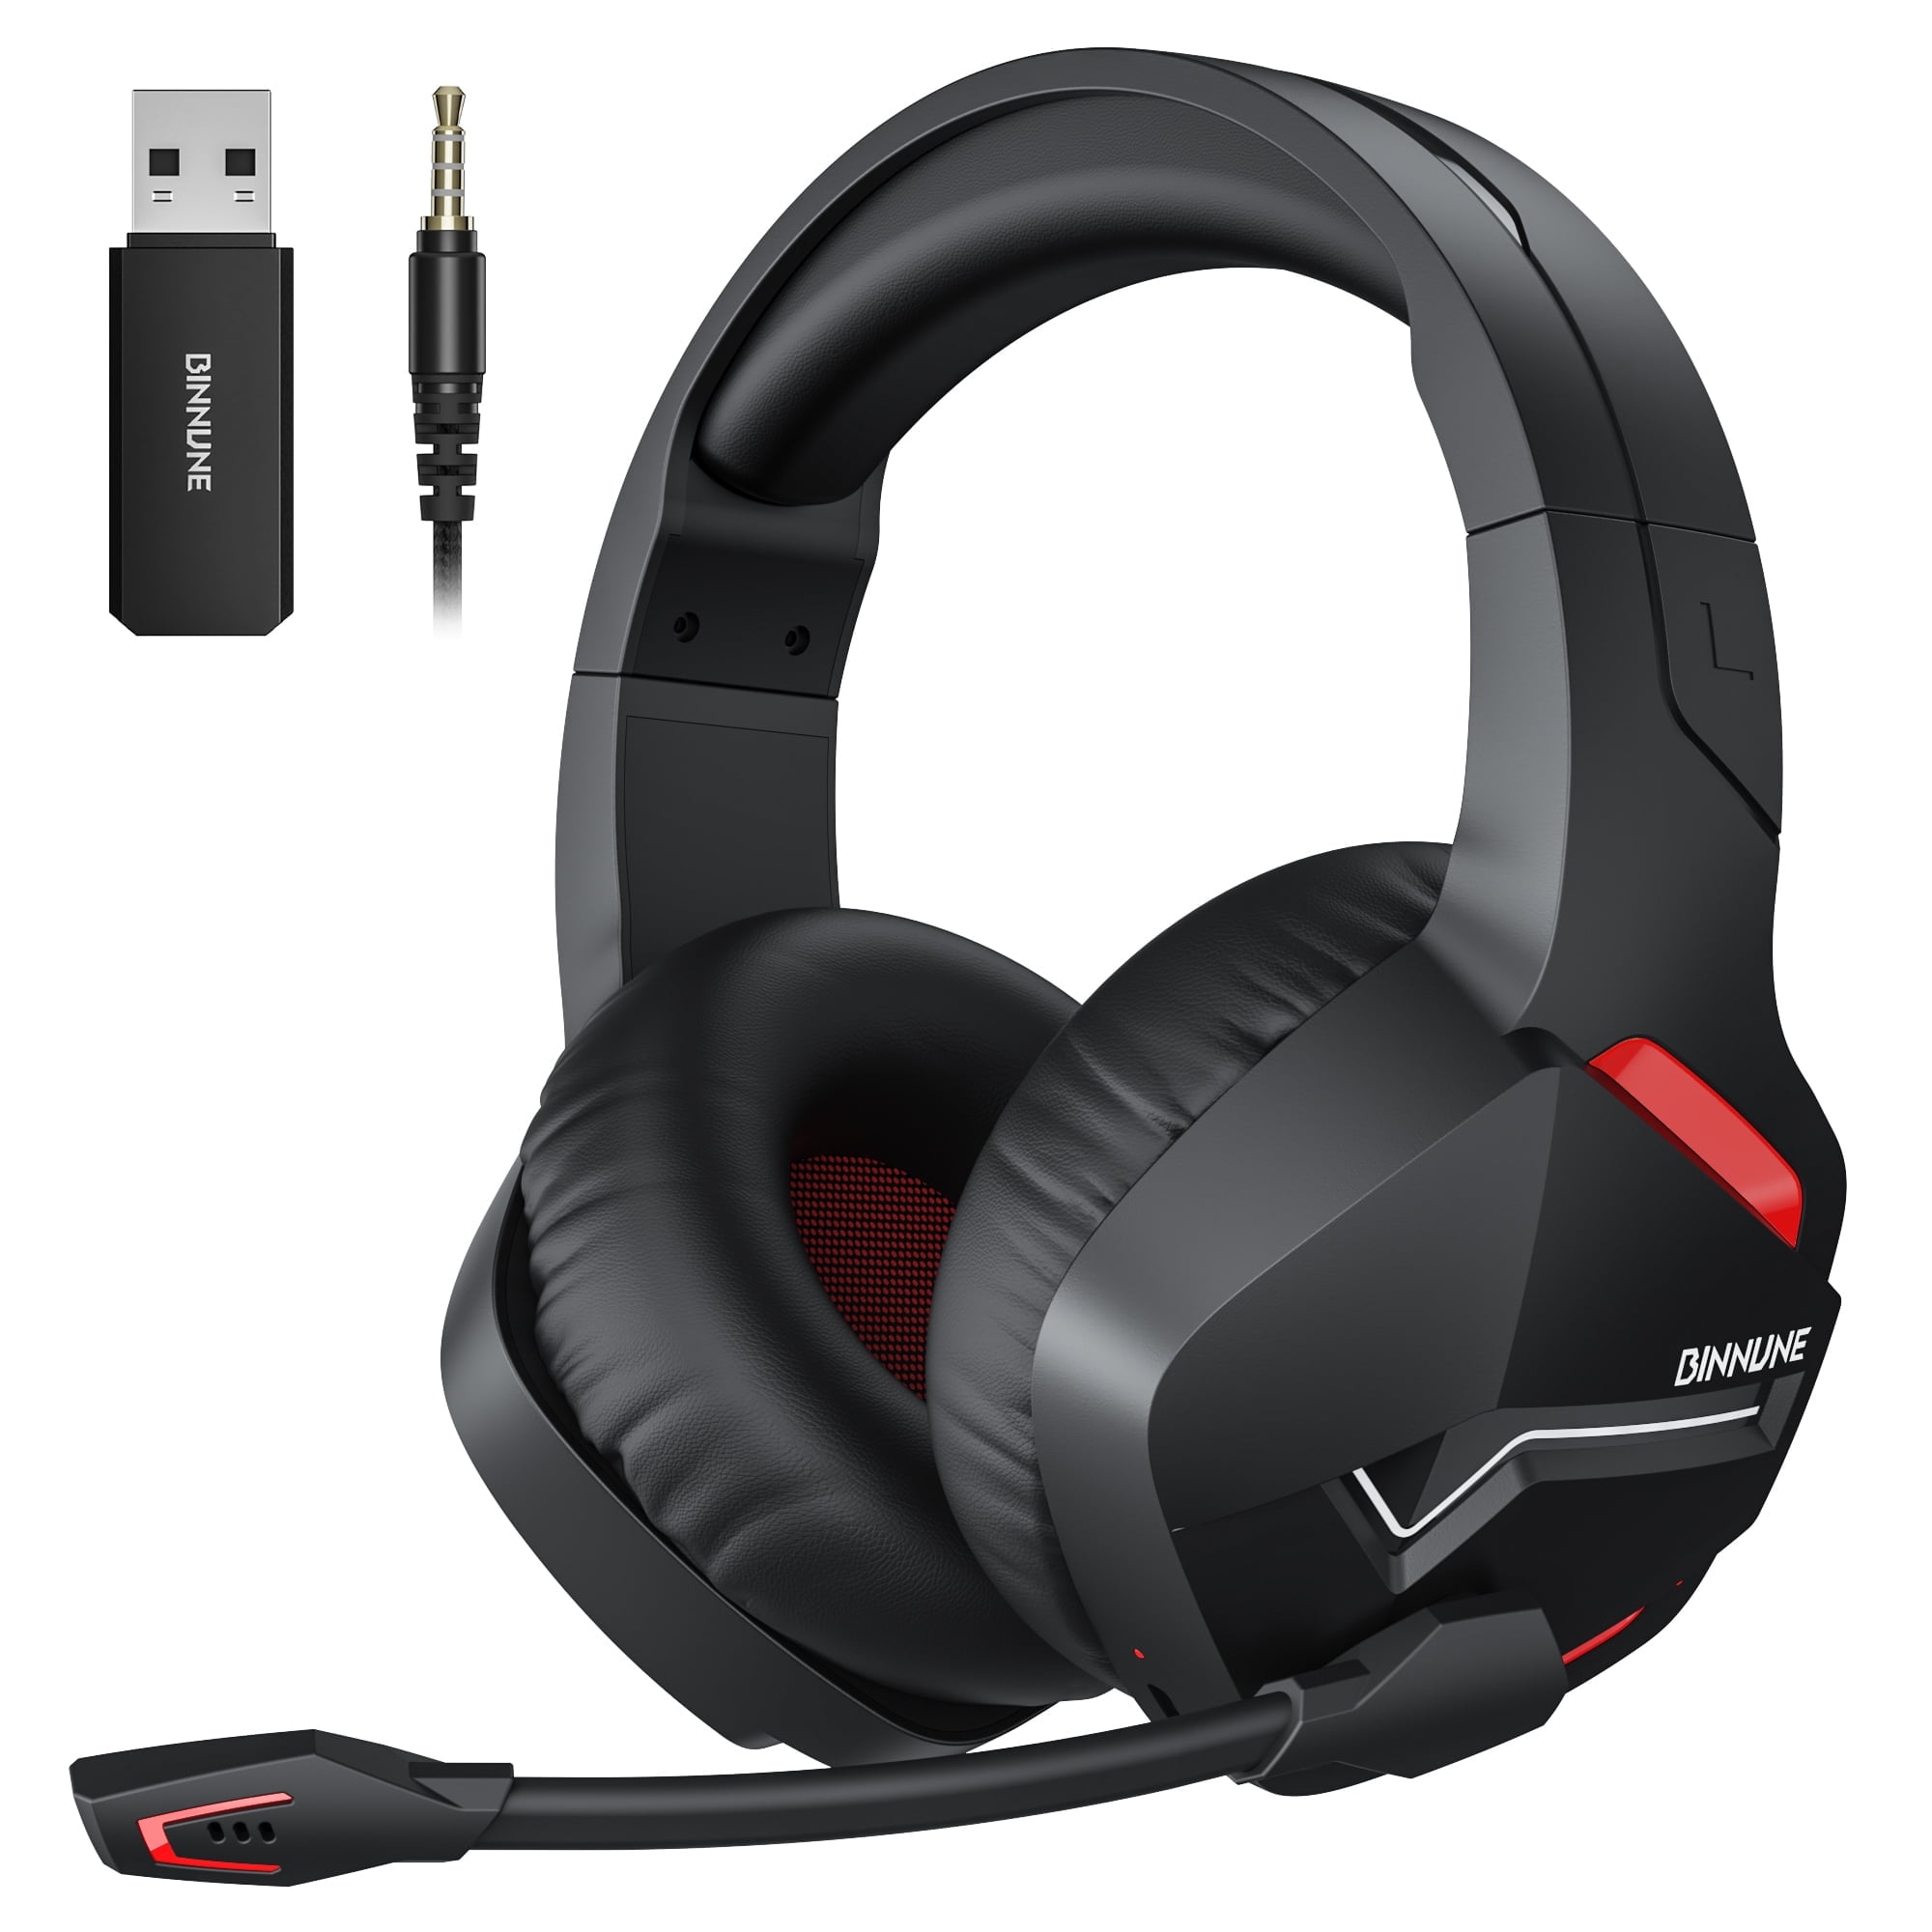 BINNUNE Dual Wireless PC Gaming Headset with Microphone for Desktop PS5 PS4  – 2.4G Bluetooth over Ear Gamer Headphone for Video Game Laptop PlayStation  Nintendo Switch iPad, Black with Red 